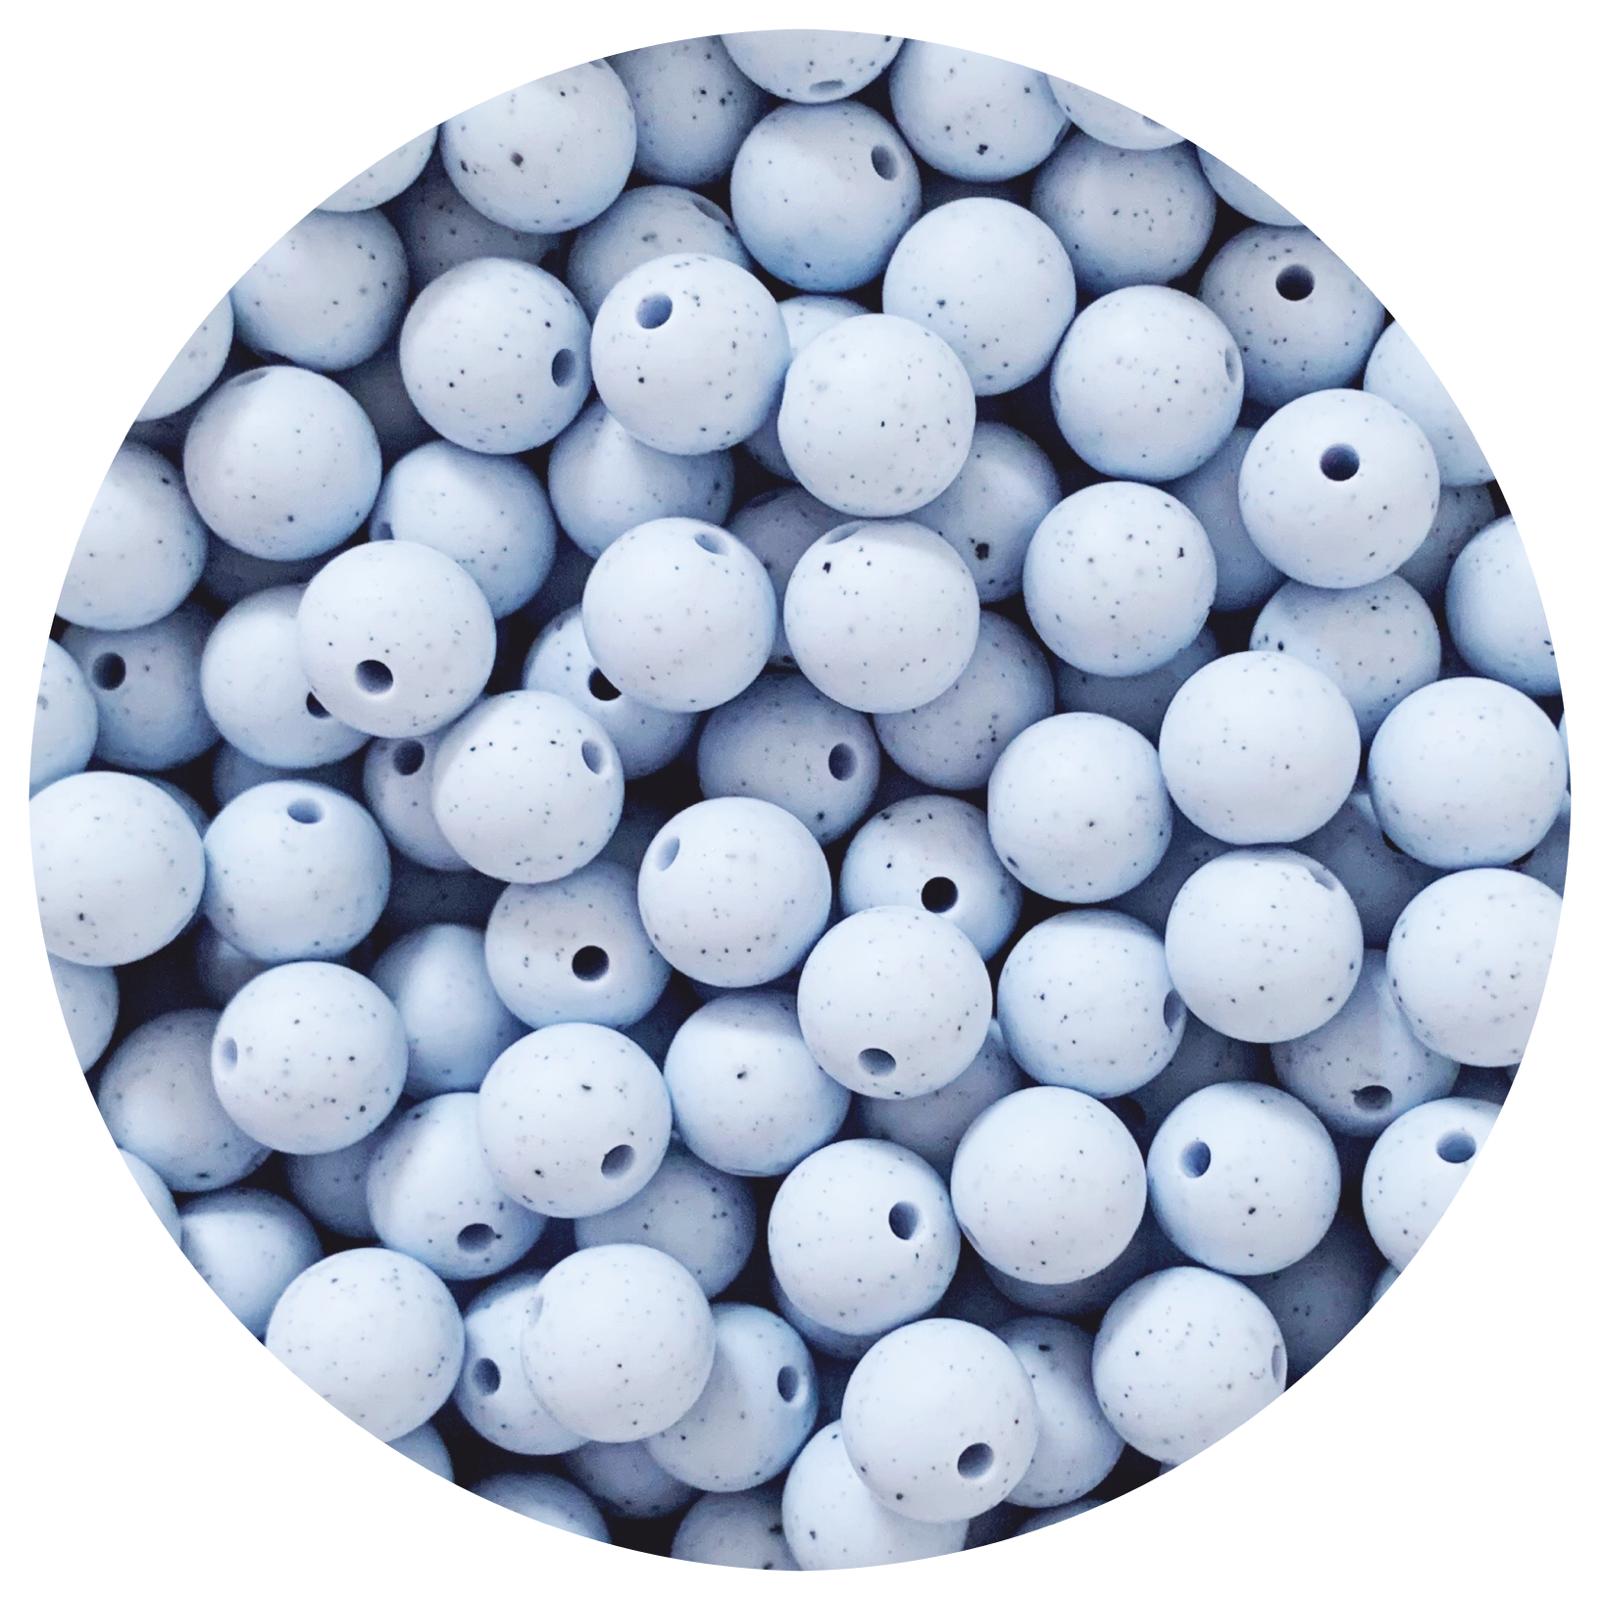 Pastel Blue Speckled - 12mm Round Silicone Beads - 10 beads